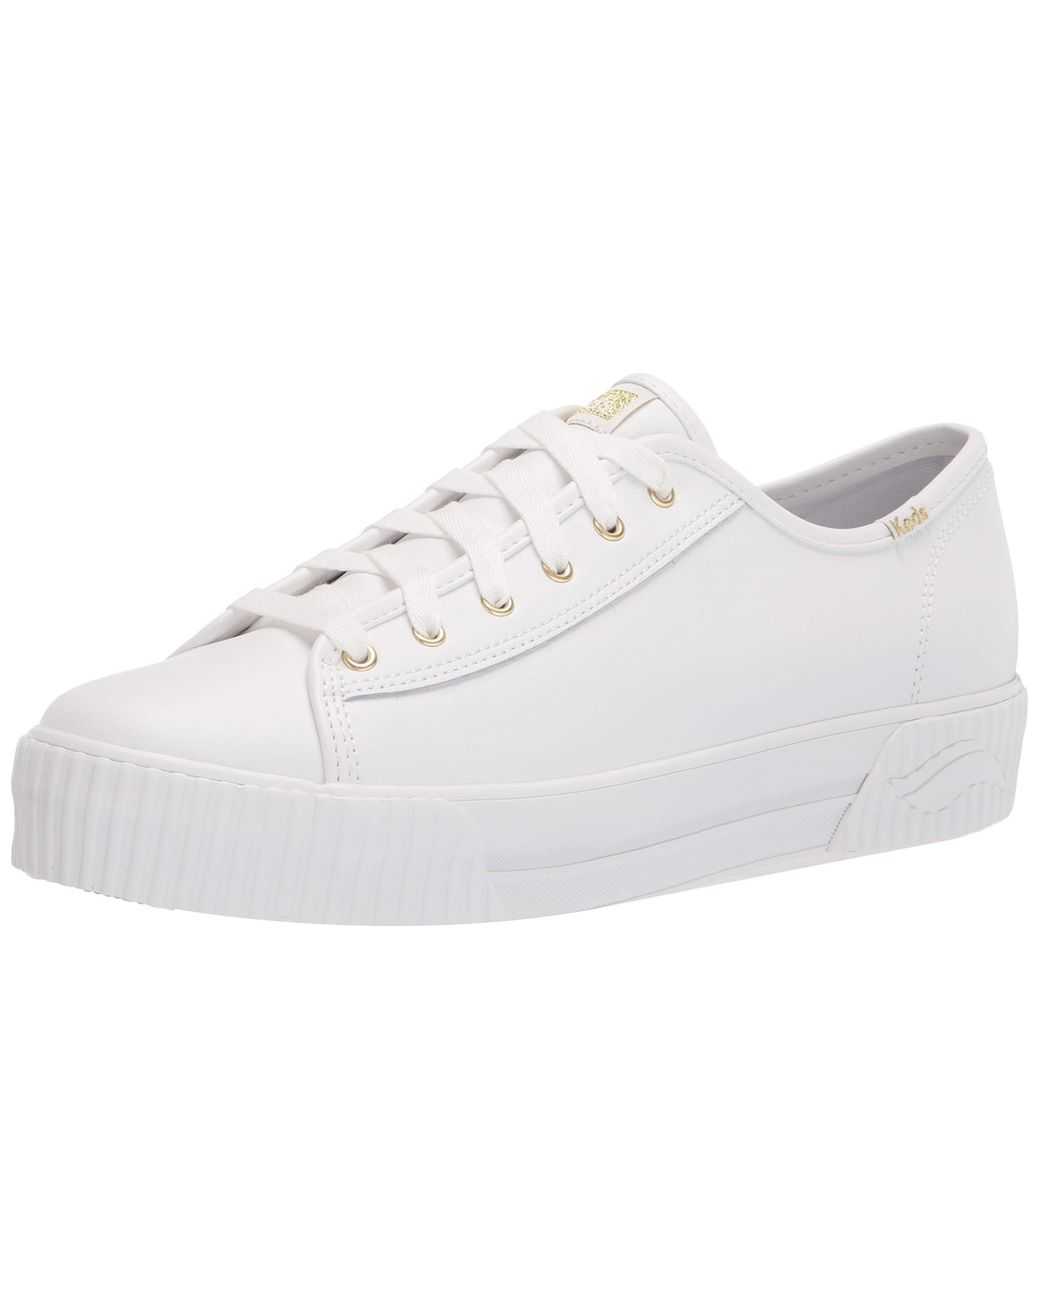 Keds Leather Womens Triple Kick Amp Sneaker in White Leather (White) - Lyst